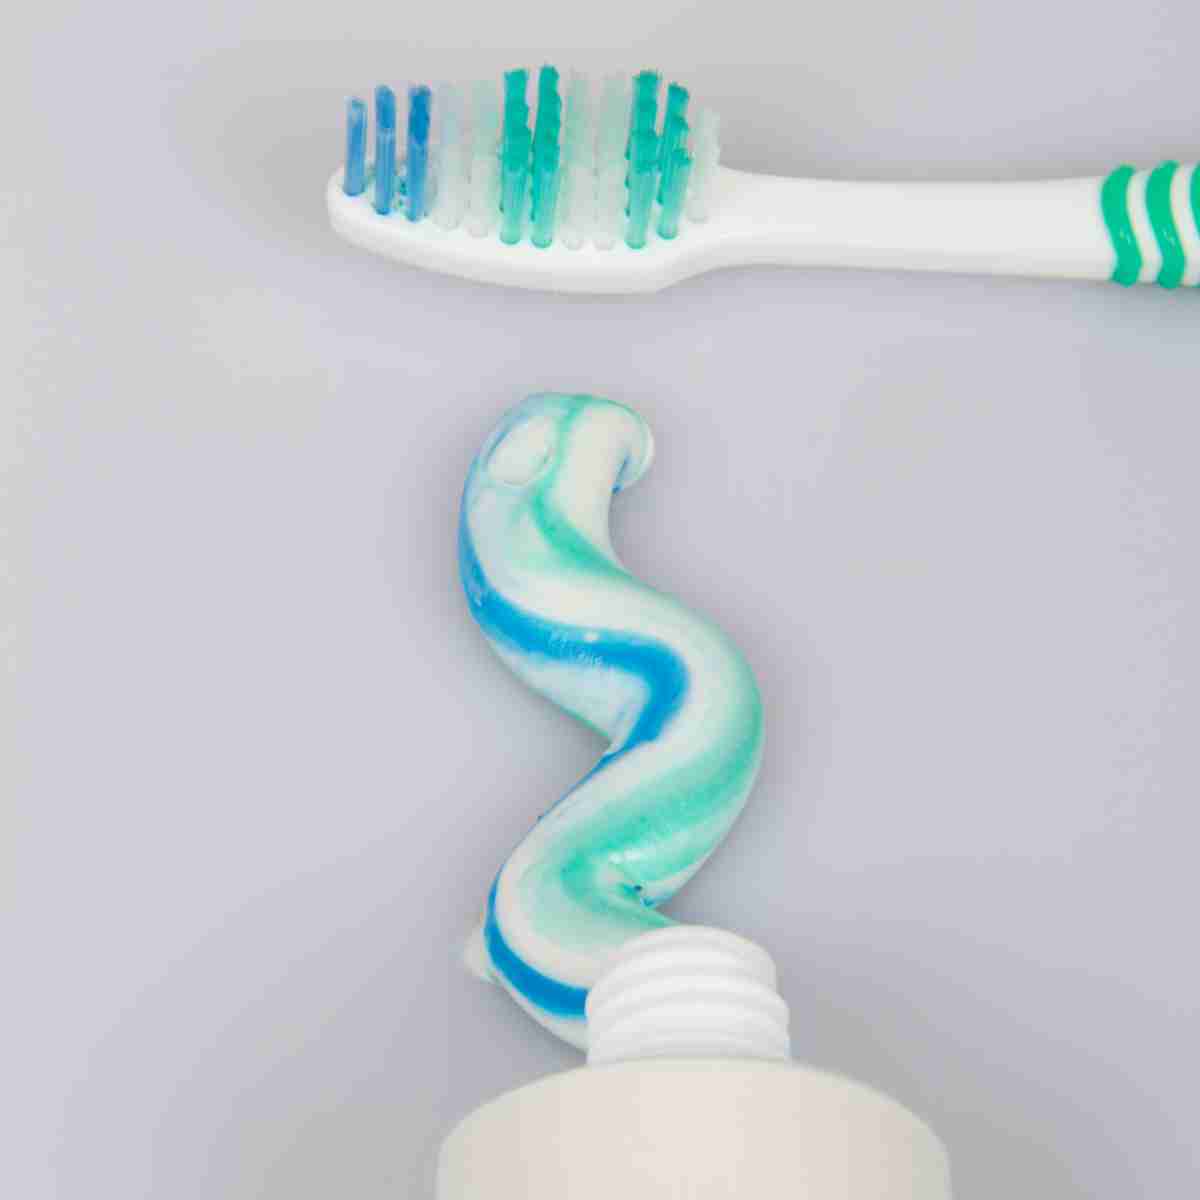 Know About Your Toothpaste